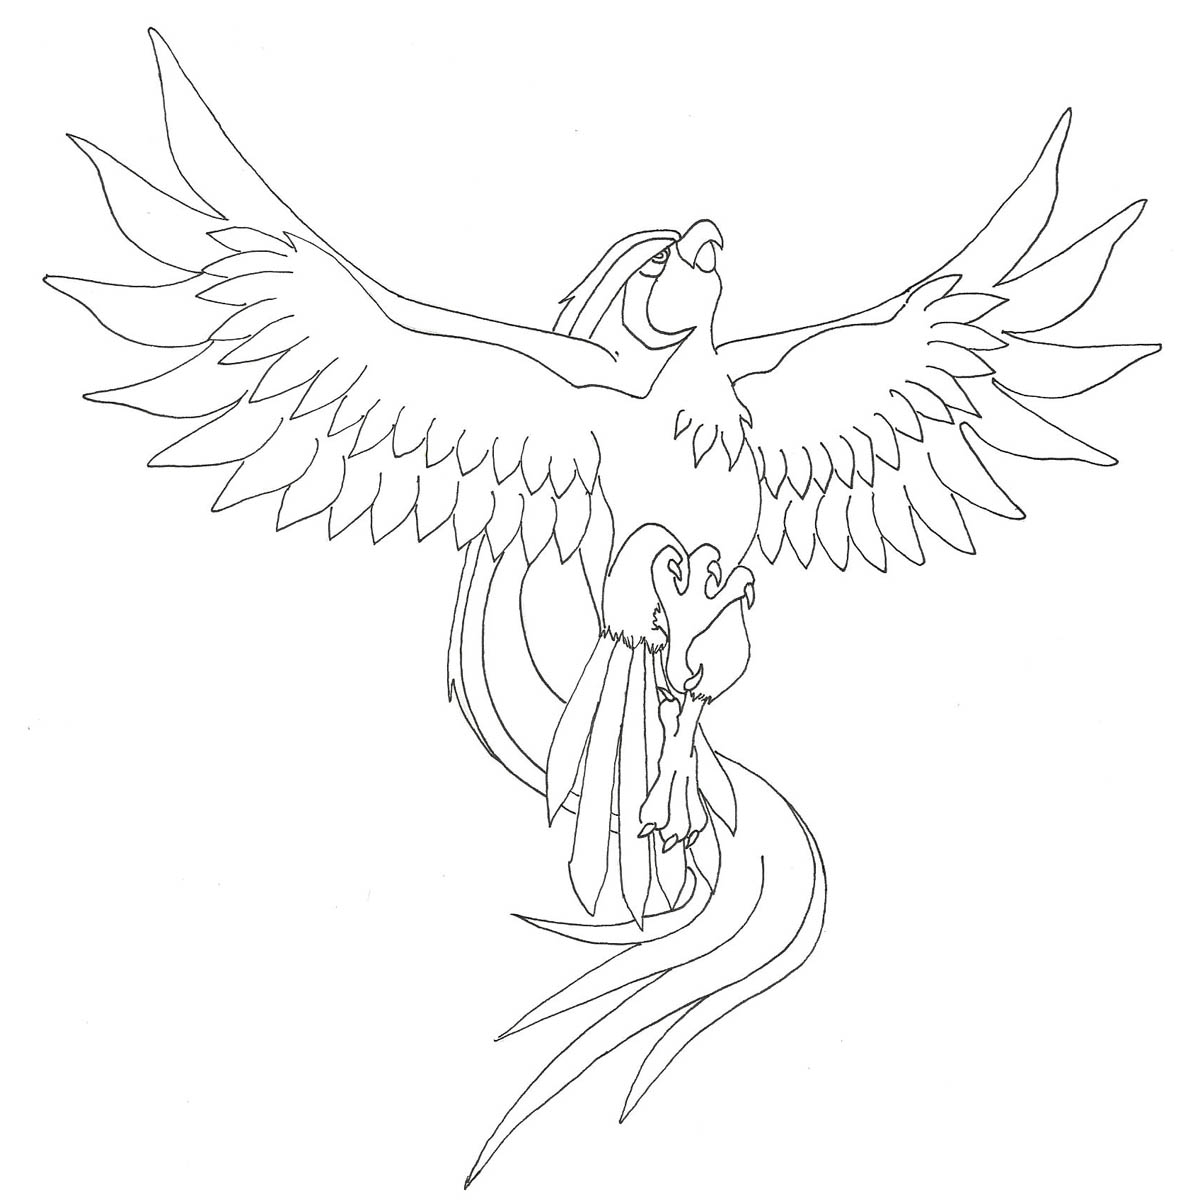 Free Pidgeot Pokemon Coloring Pages by Saij-Spellhart printable